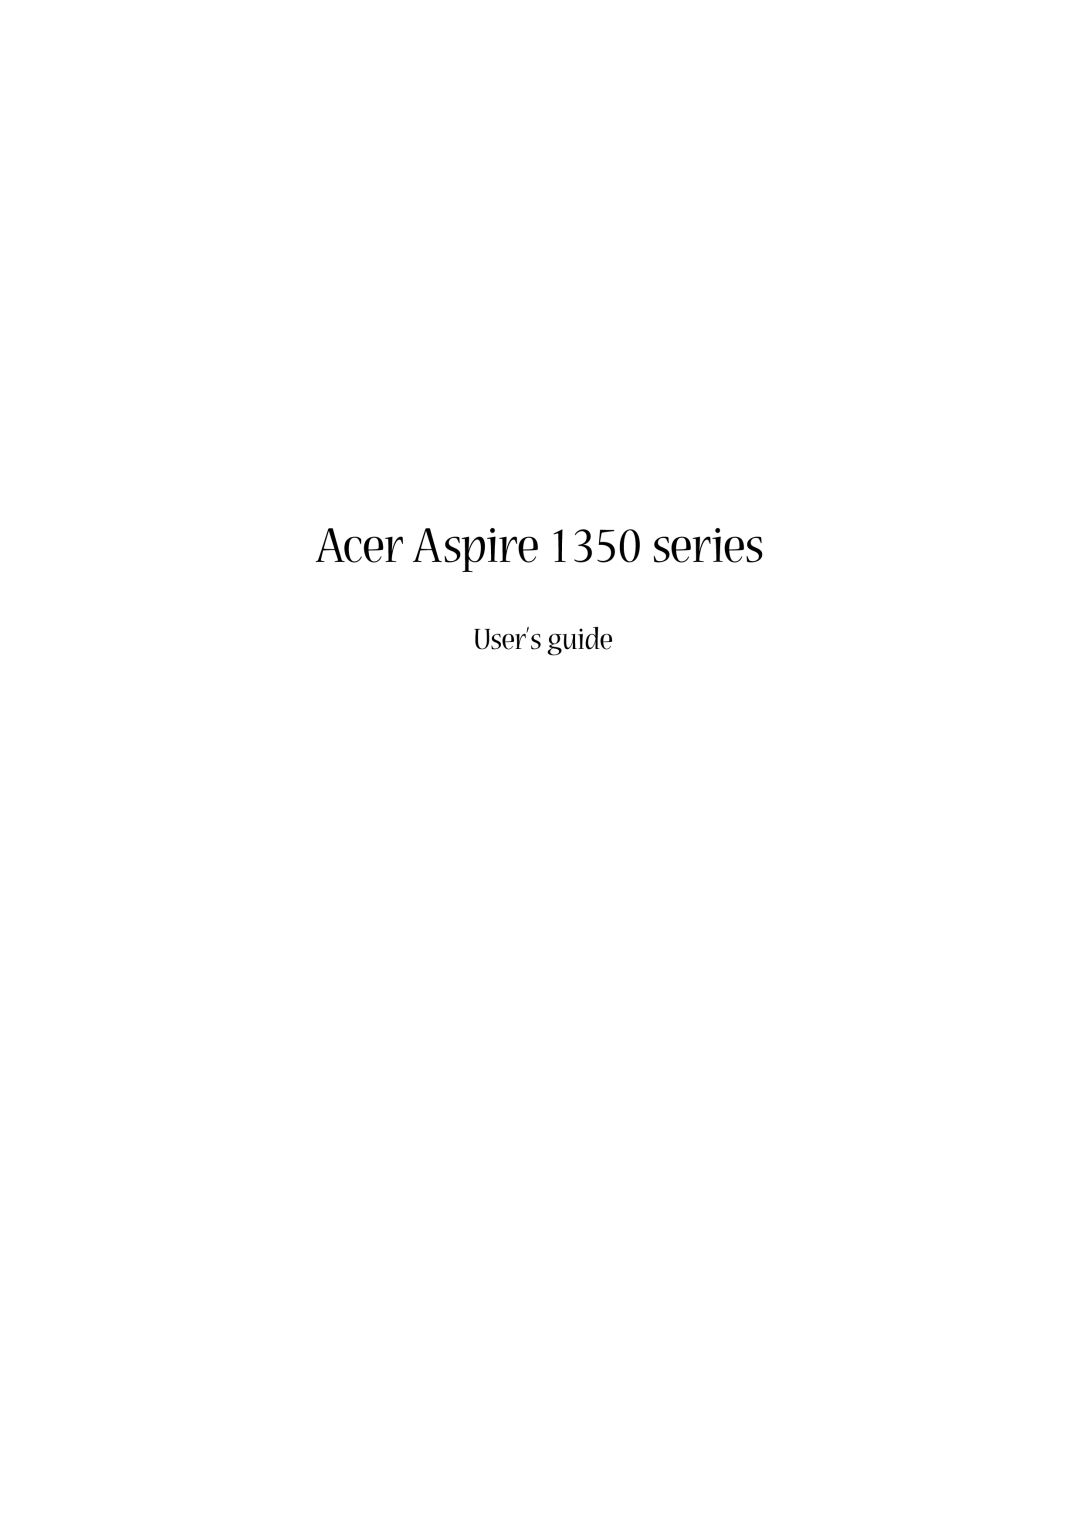 Acer manual User’s guide, Acer Aspire 1350 series 